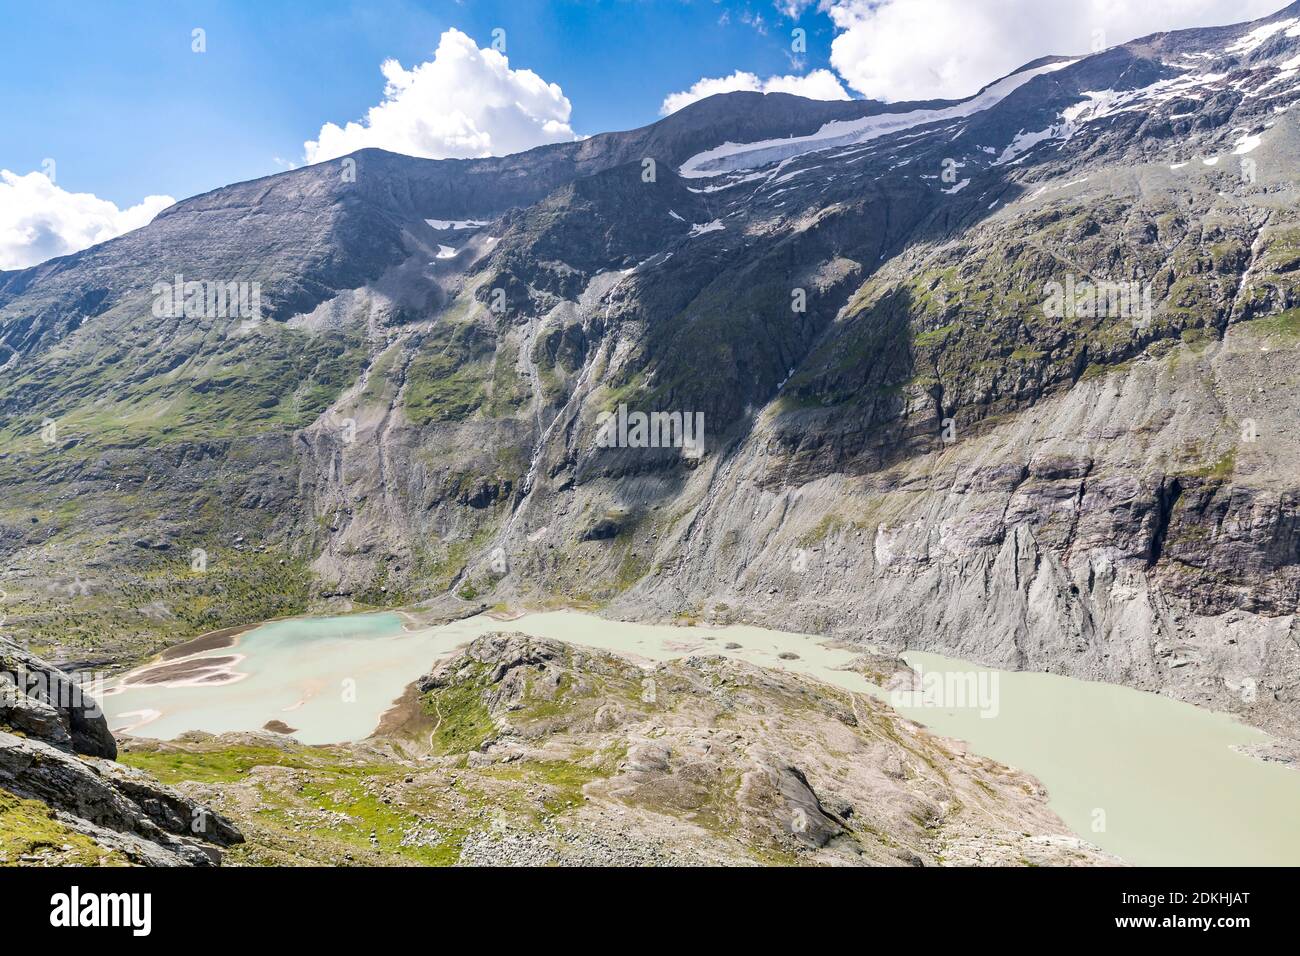 Pasterzengrund with Sandersee, view from Kaiser-Franz-Josefs-Höhe, behind the head of the ladder and the sword head, Hohe Tauern National Park, Carinthia, Austria Stock Photo